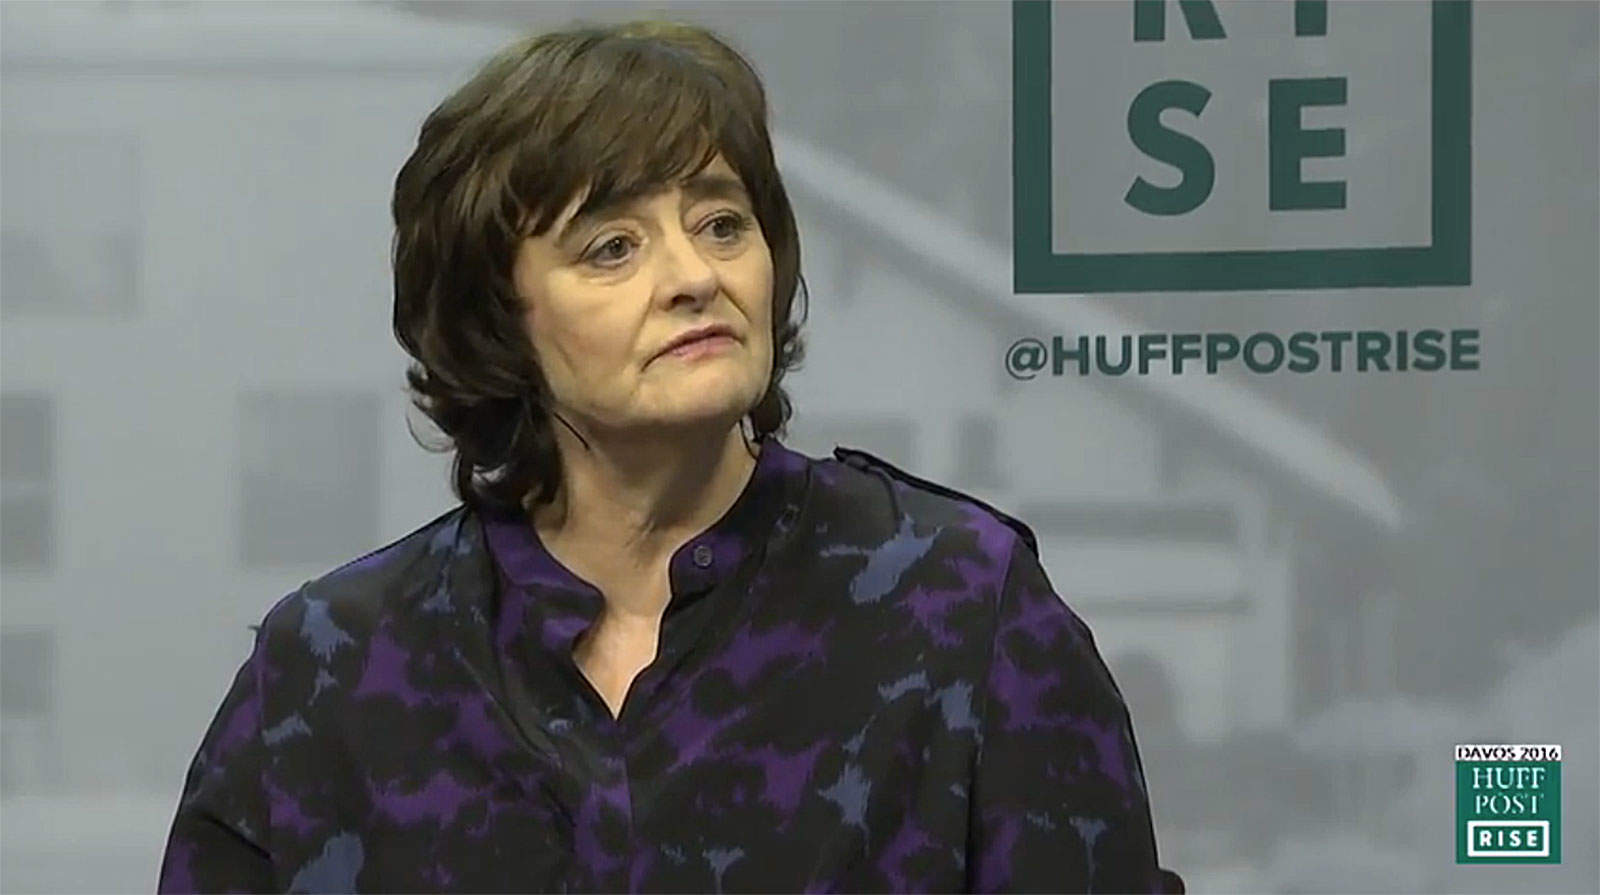 Cherie Blair, women's rights advocate and wife of a former British prime minister, chides Apple for its lack of diversity.